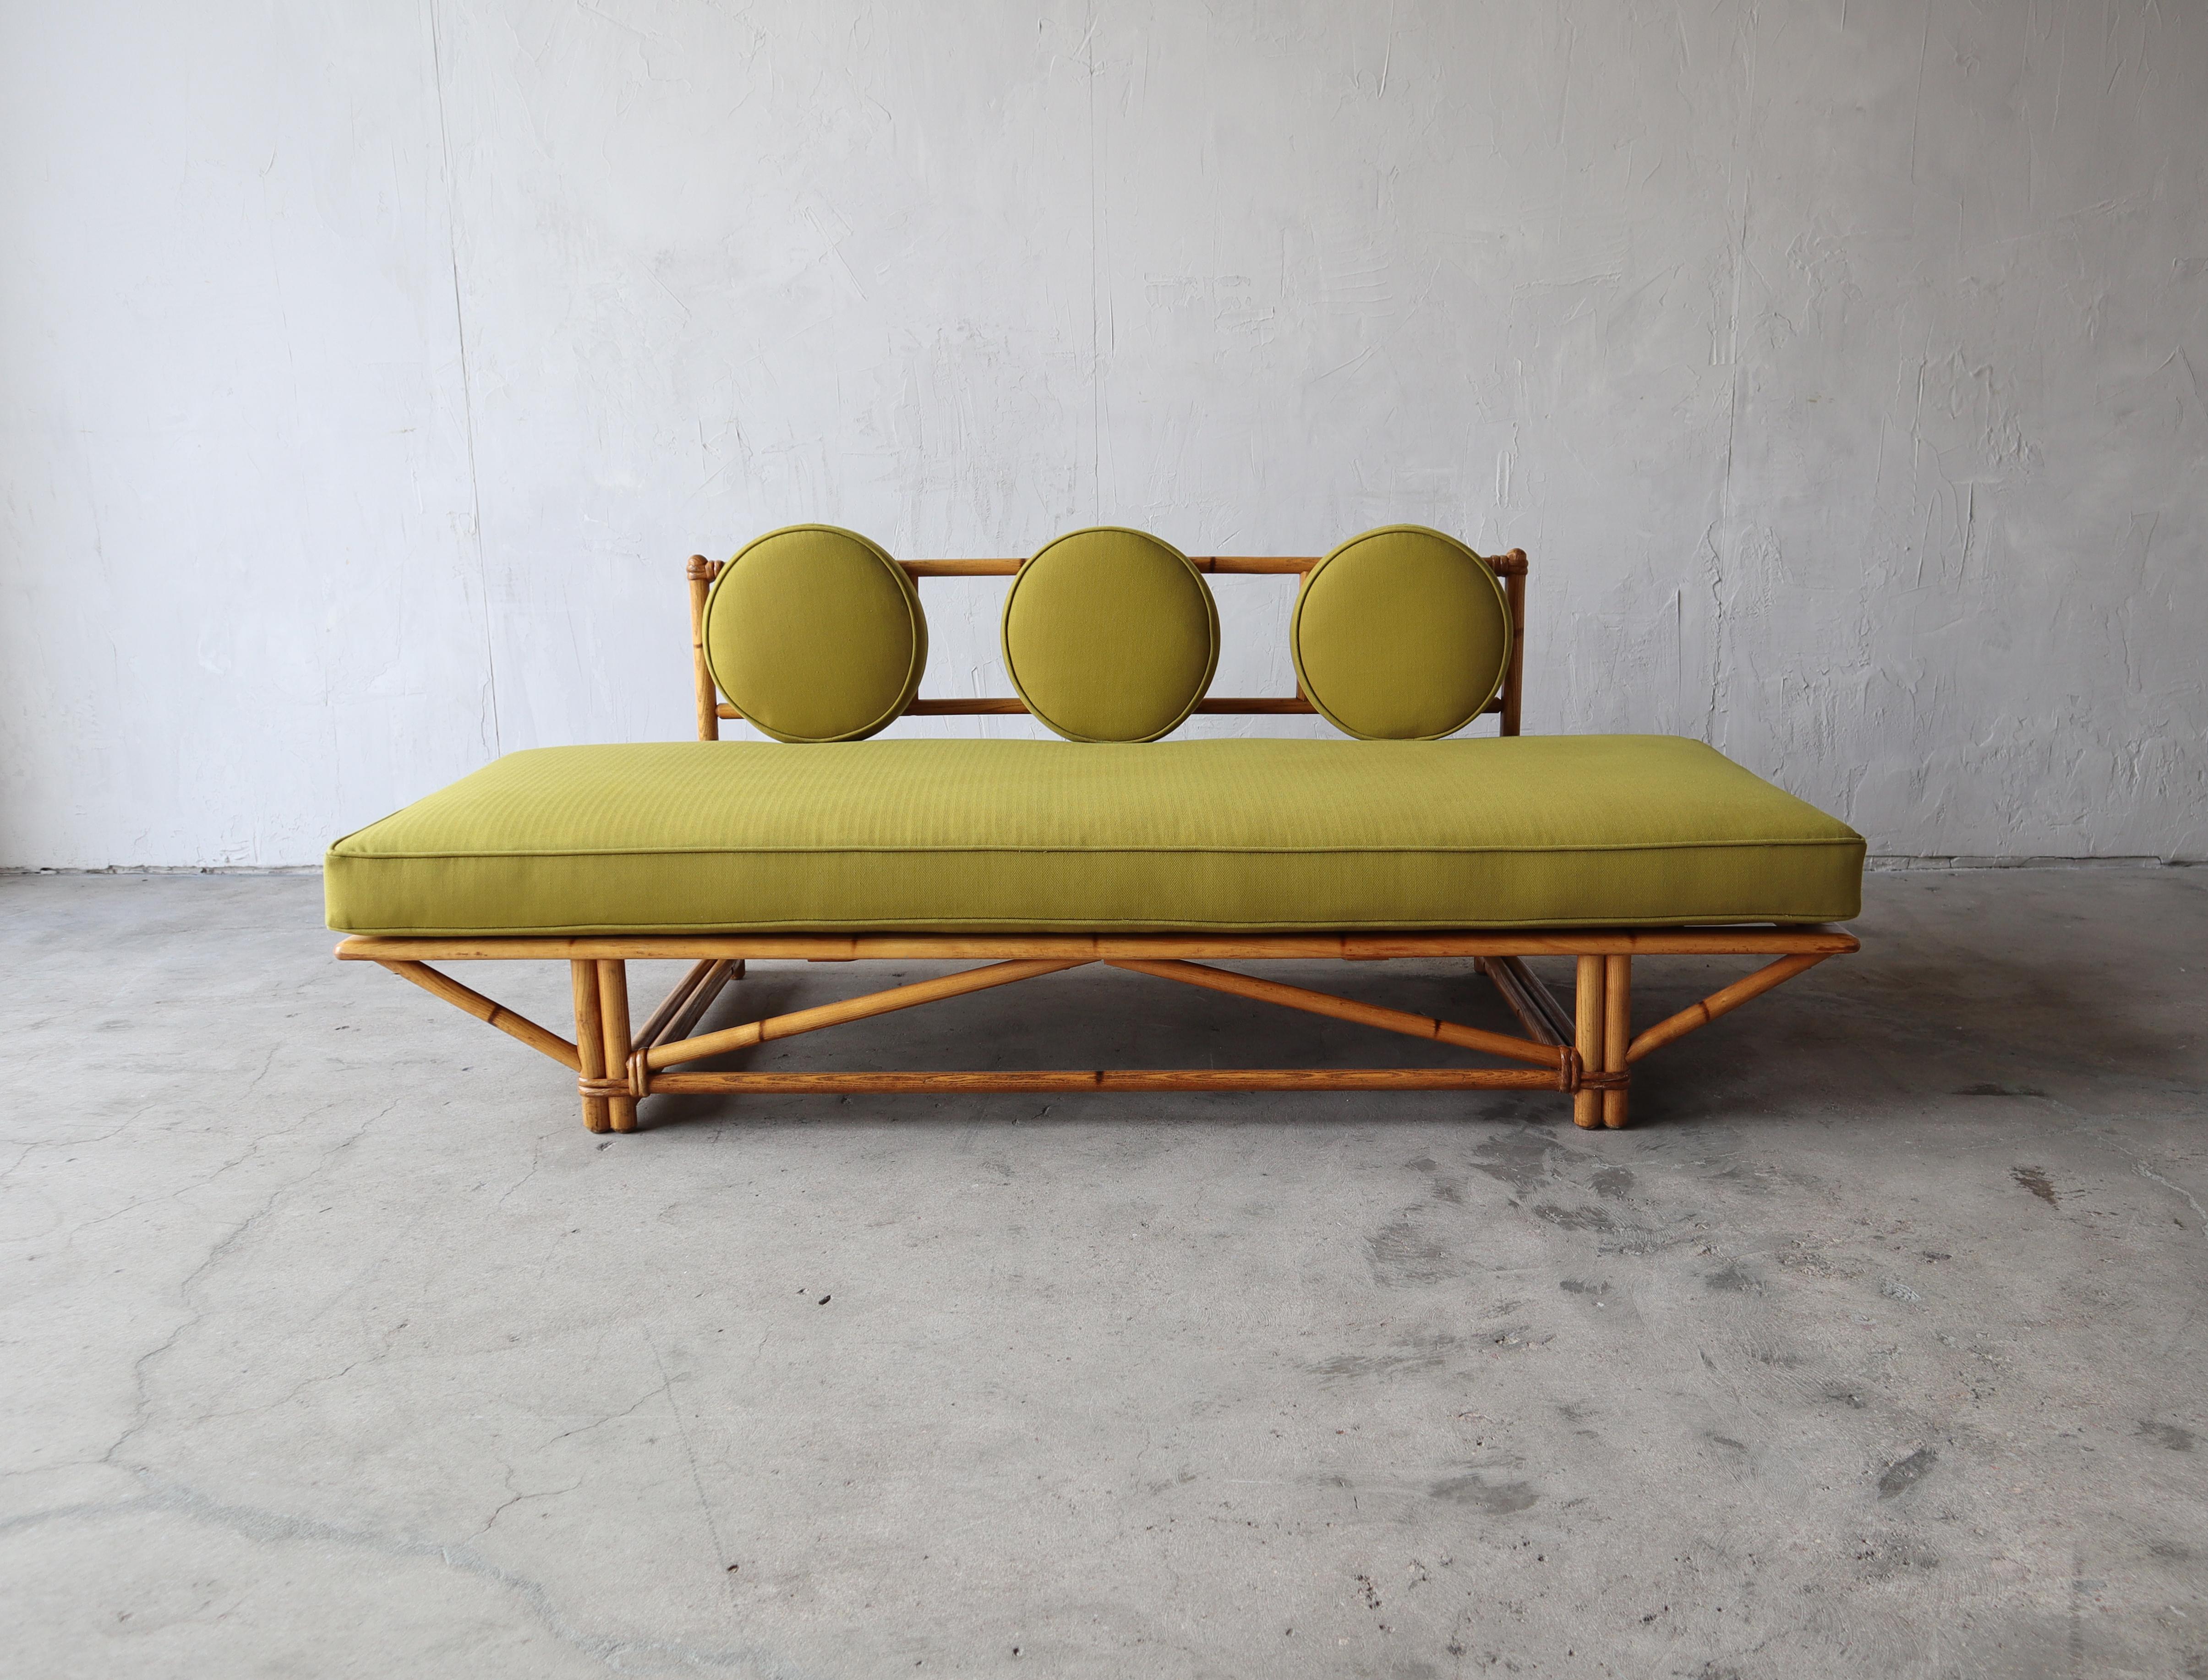 Stunning example of vintage bamboo. This gorgeous bamboo daybed sofa has show stopping lines and will add warmth and texture to any space. It has been modernized with all new foam and fabric and stylish round back cushions, taking it from kitch and